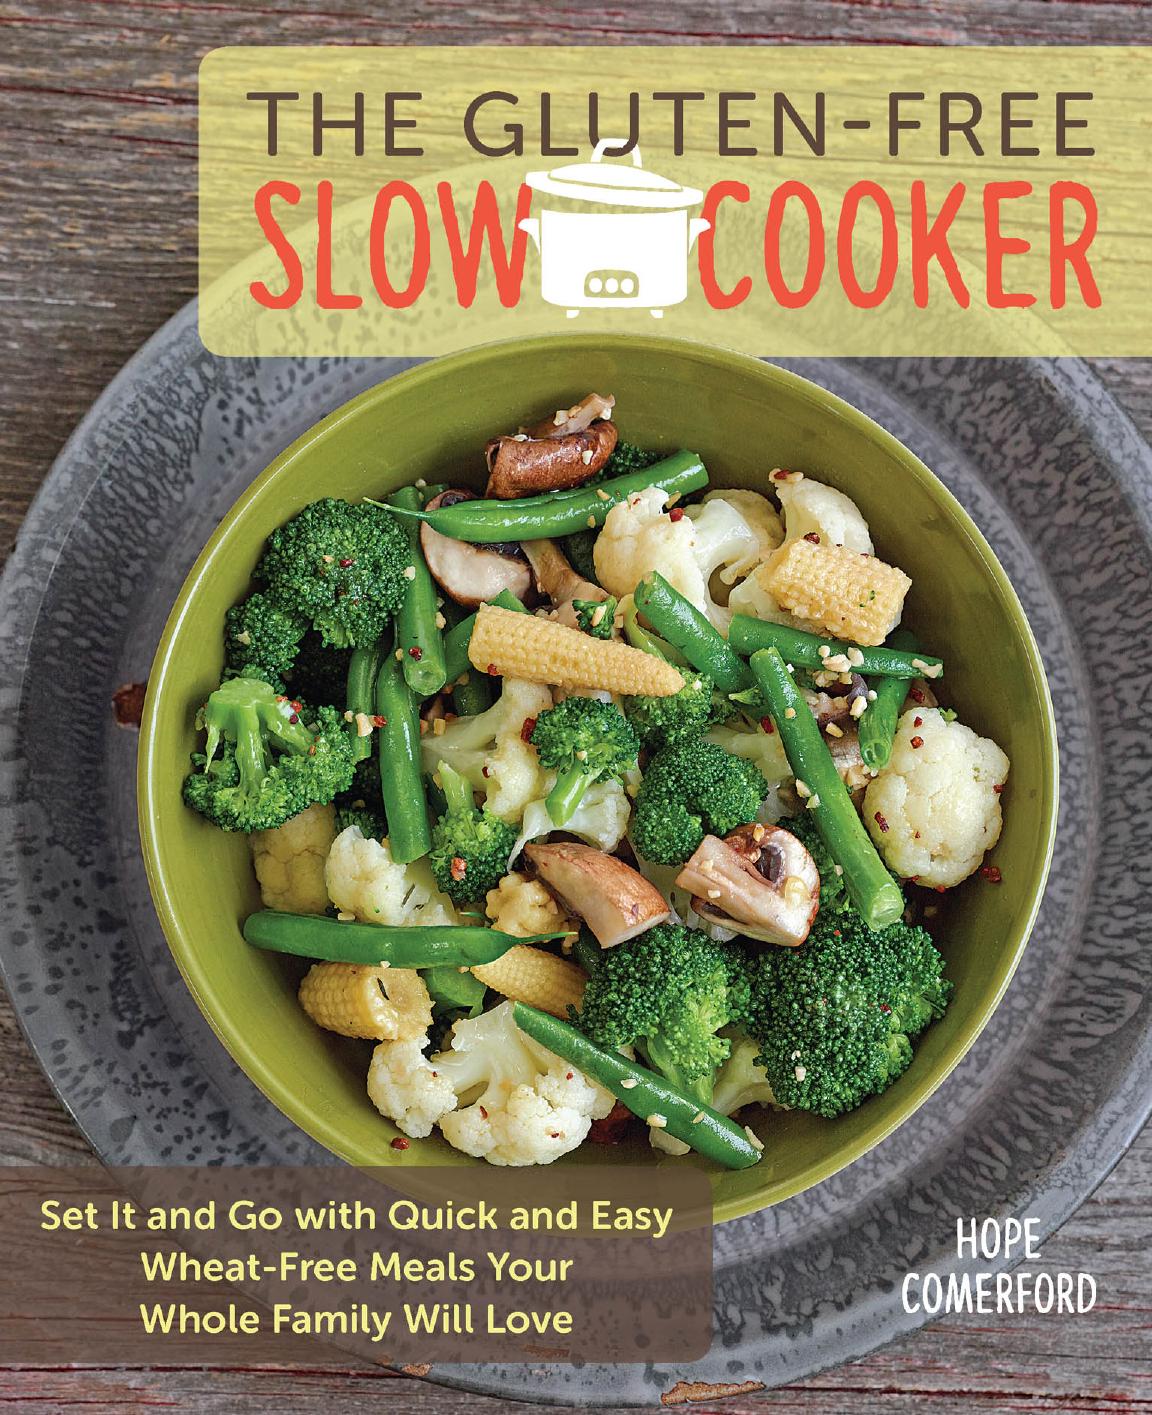 The Gluten-Free Slow Cooker: Set It and Go with Quick and Easy Wheat-Free Meals Your Whole Family Will Love by Hope Comerford